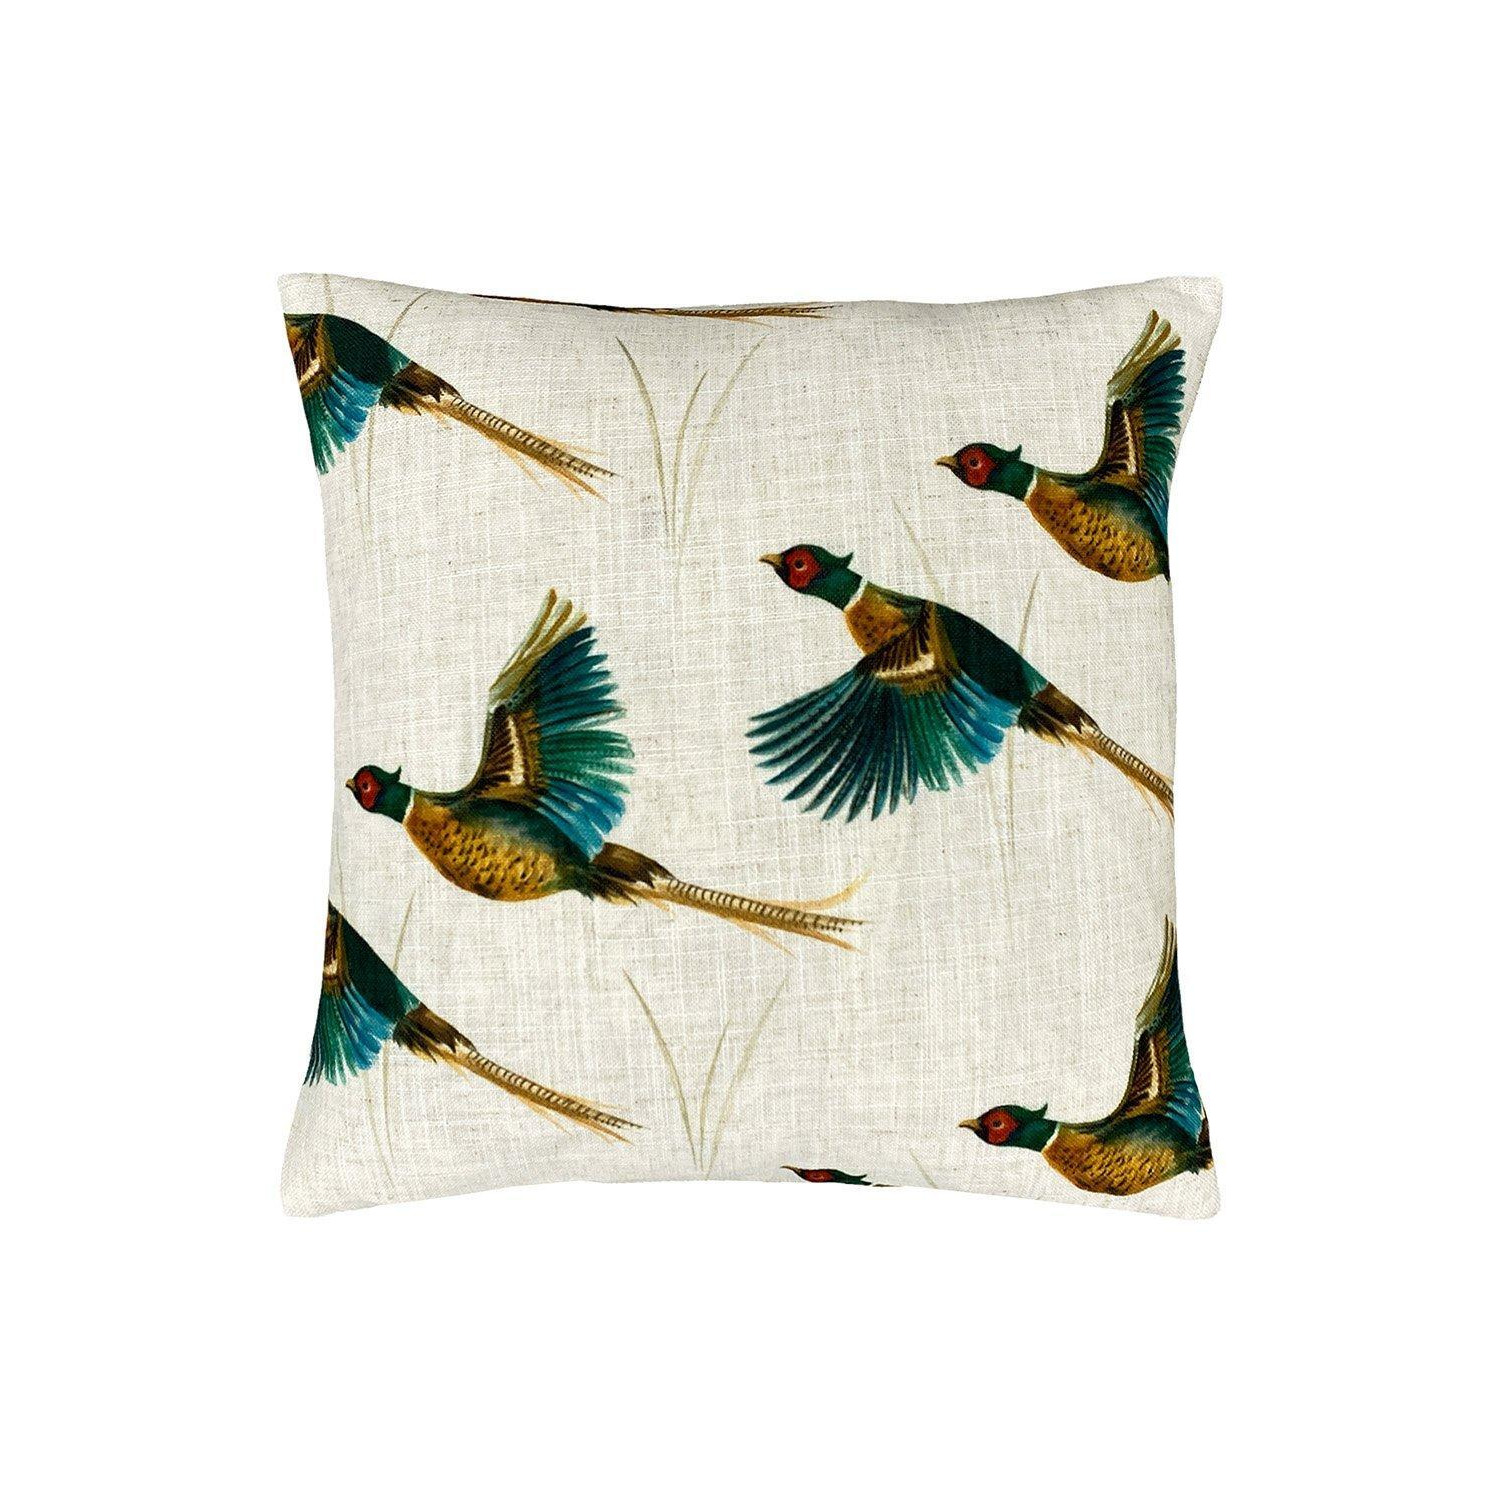 Country Flying Pheasants Hand-Painted Printed Cushion - image 1